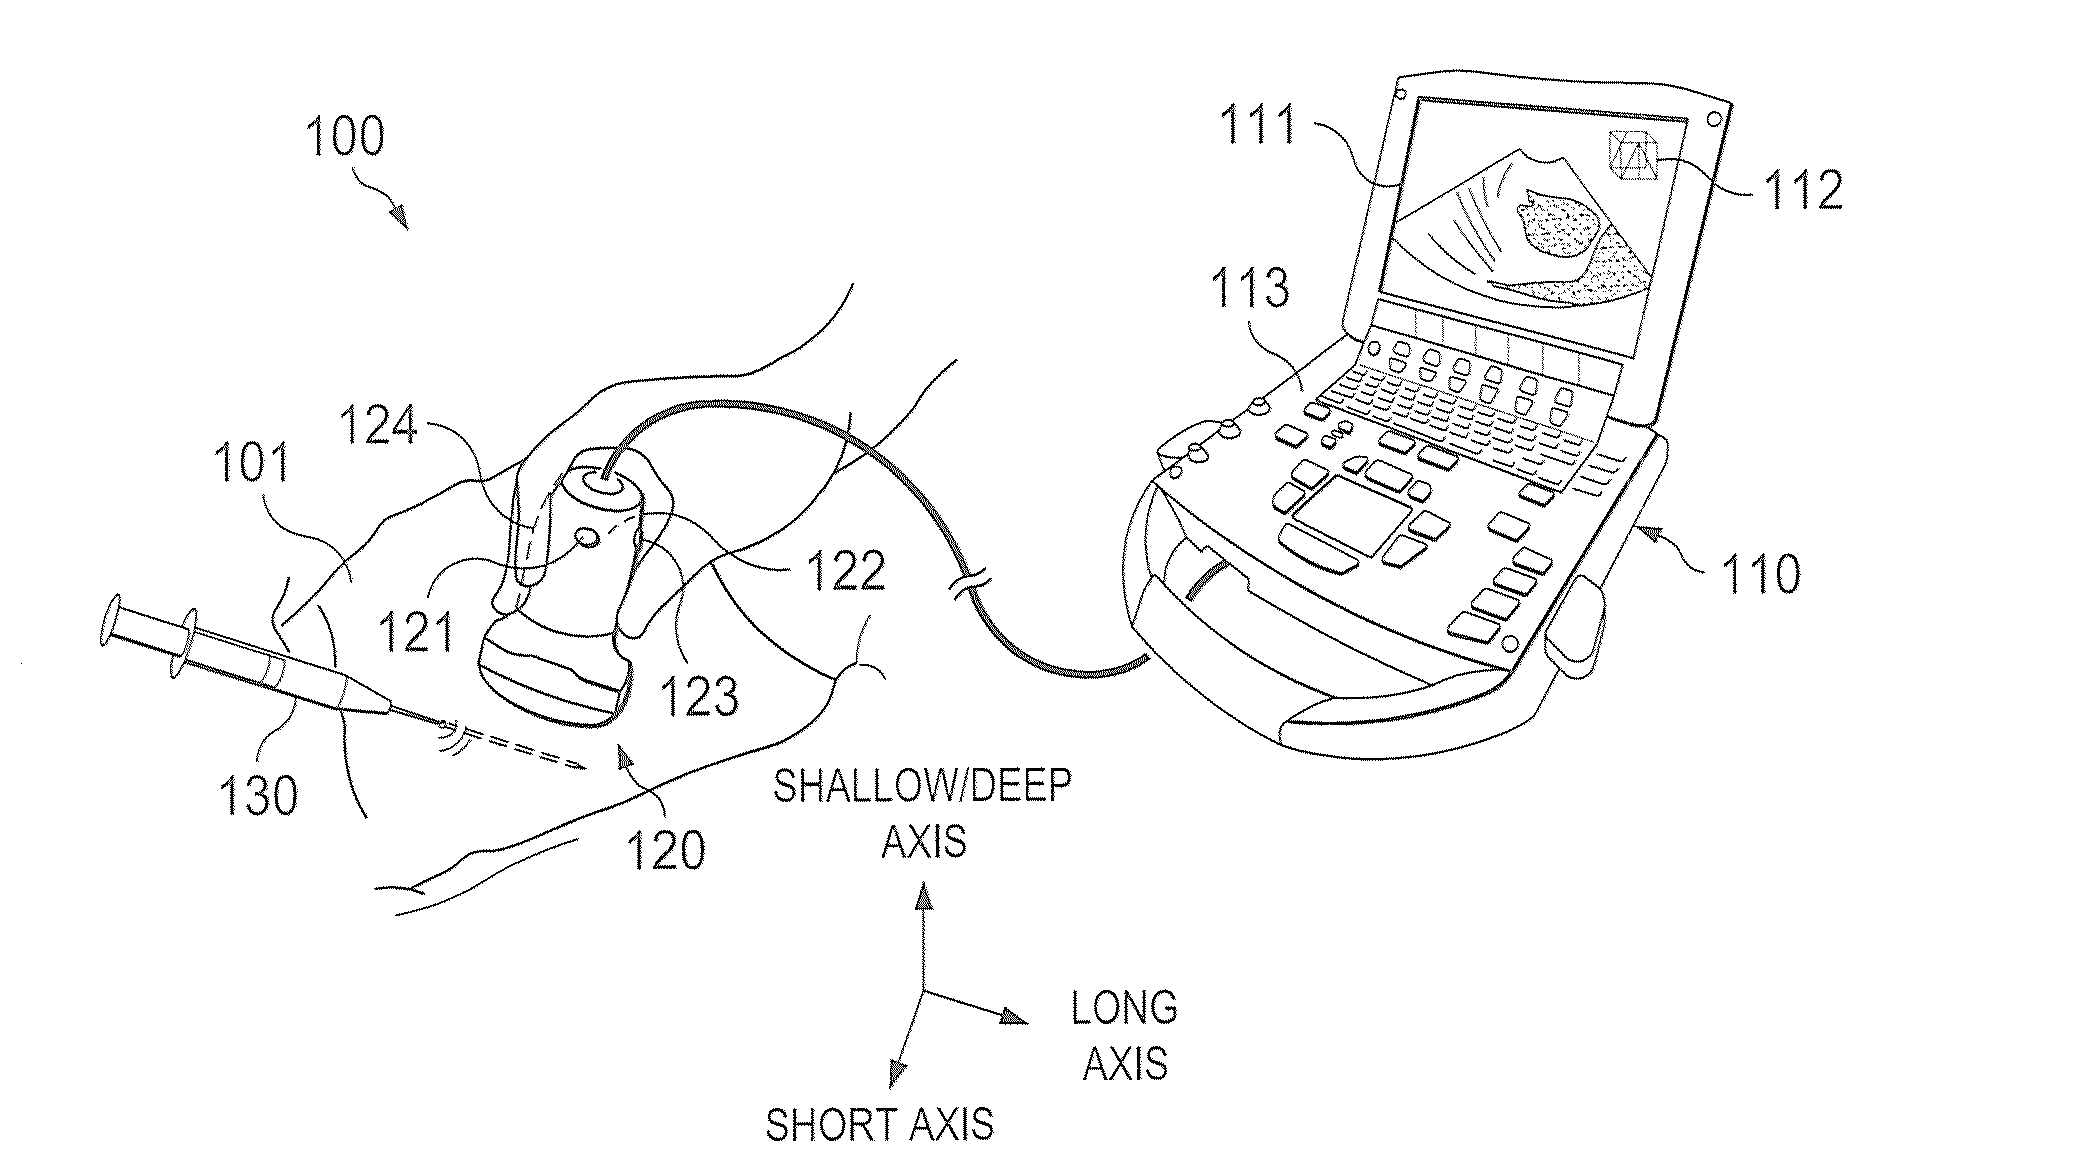 Systems and methods to identify interventional instruments